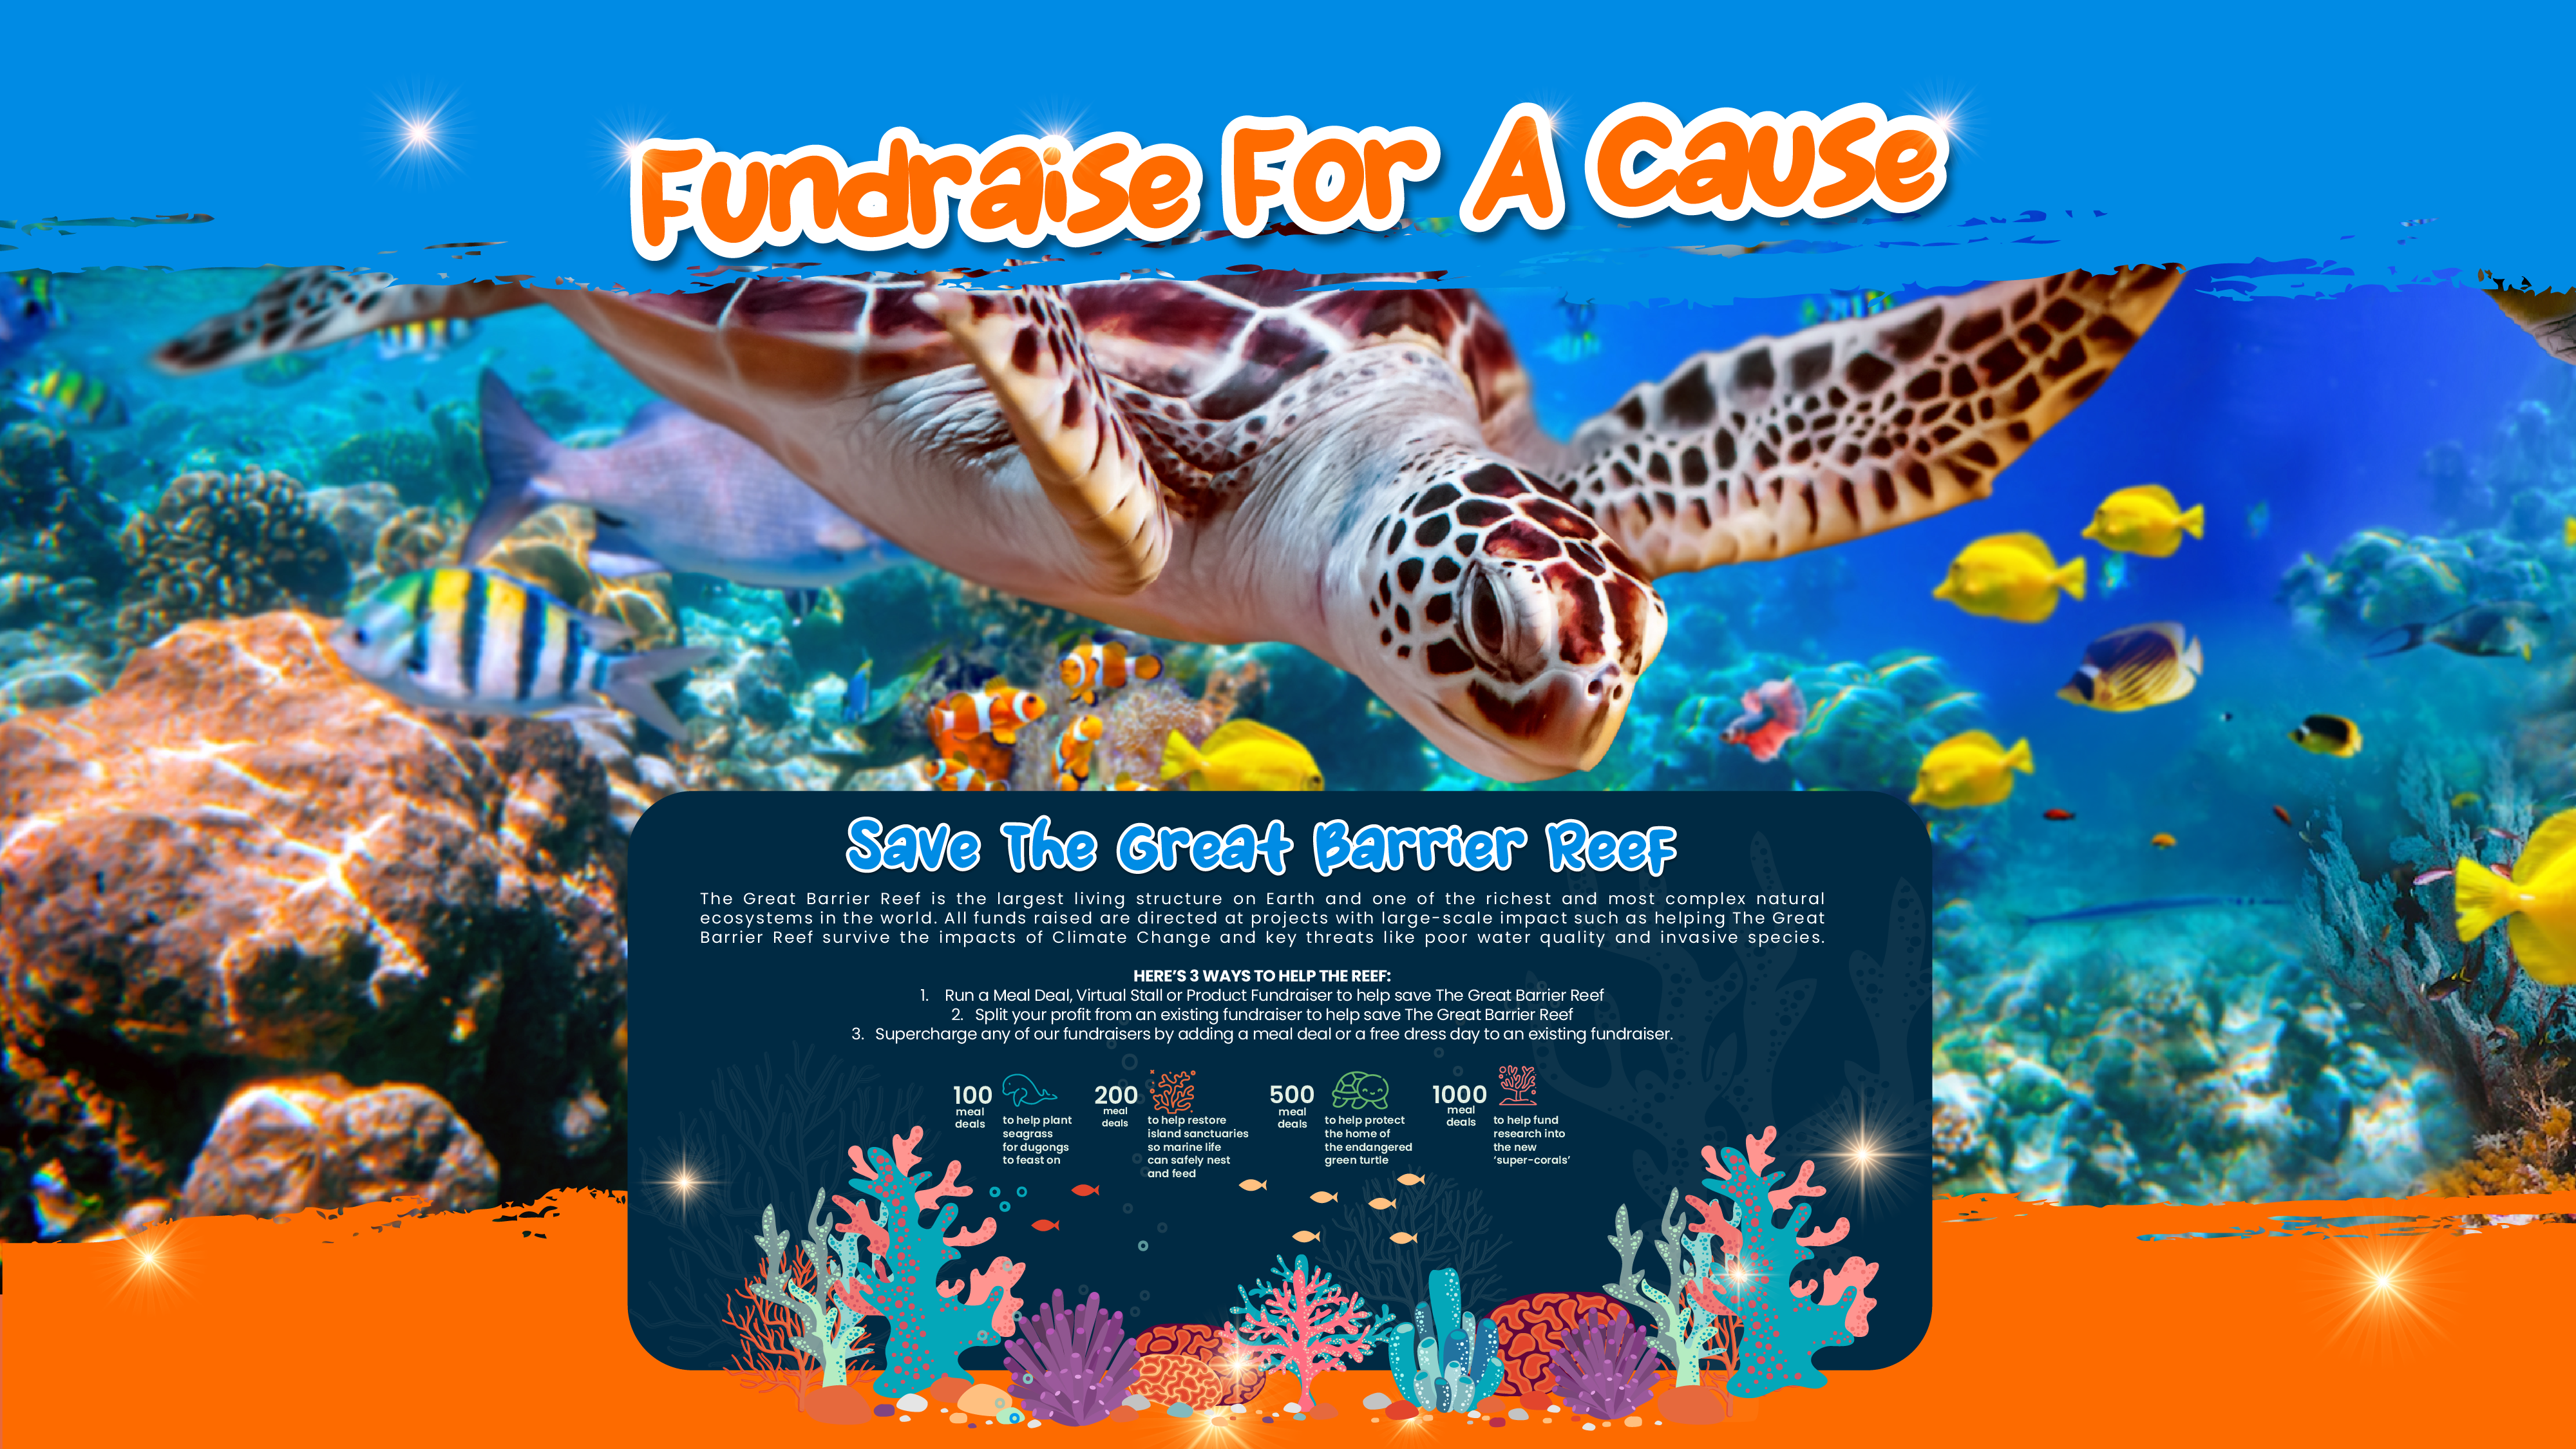 FUNDRAISE FOR A CAUSE - Great Barrier Reef